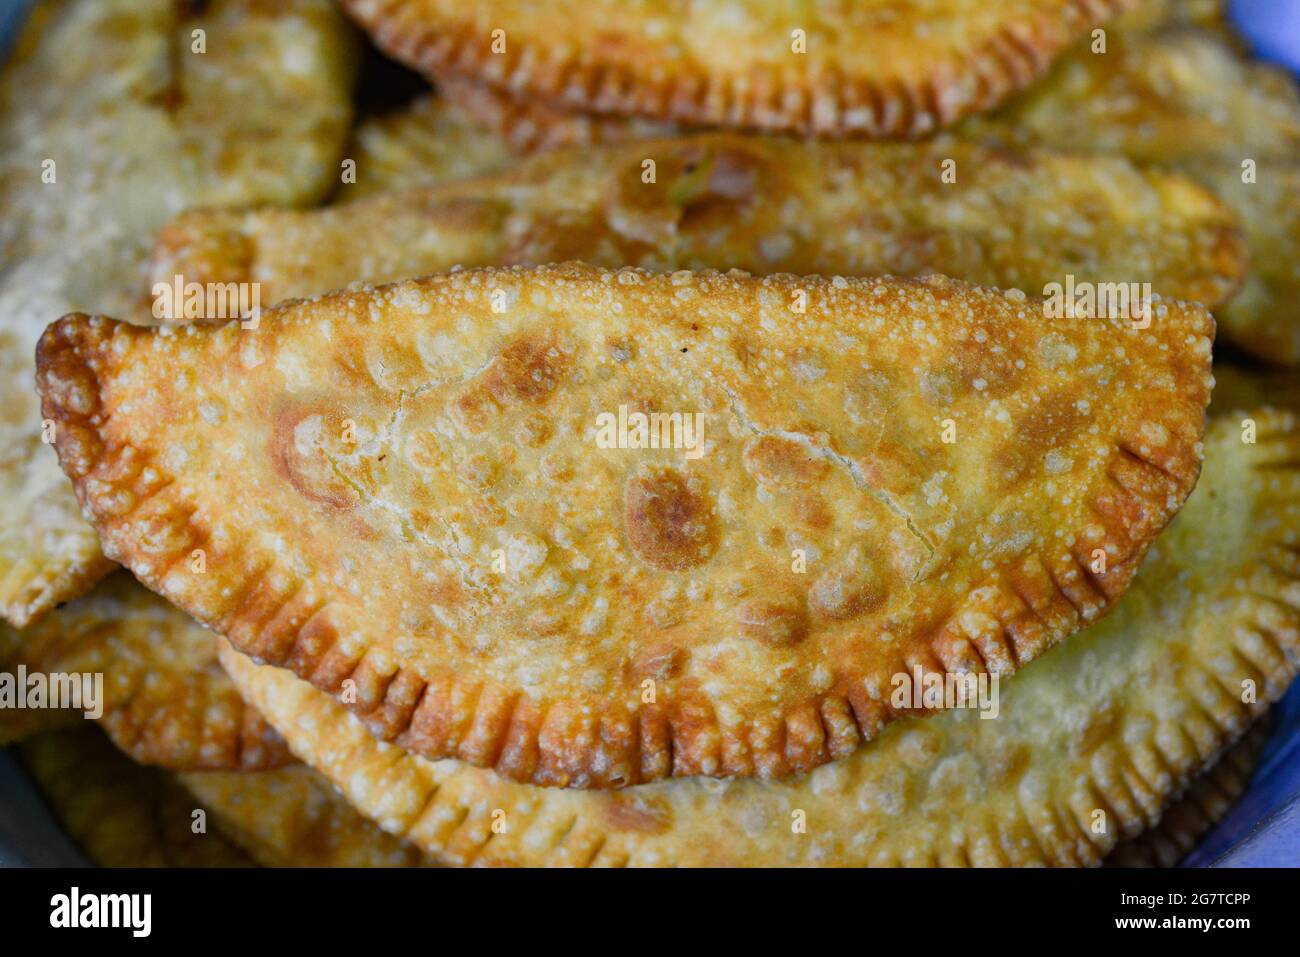 Chebureki baked on a pan in hot oil. pies with meat filling baked in hot oil. Stock Photo